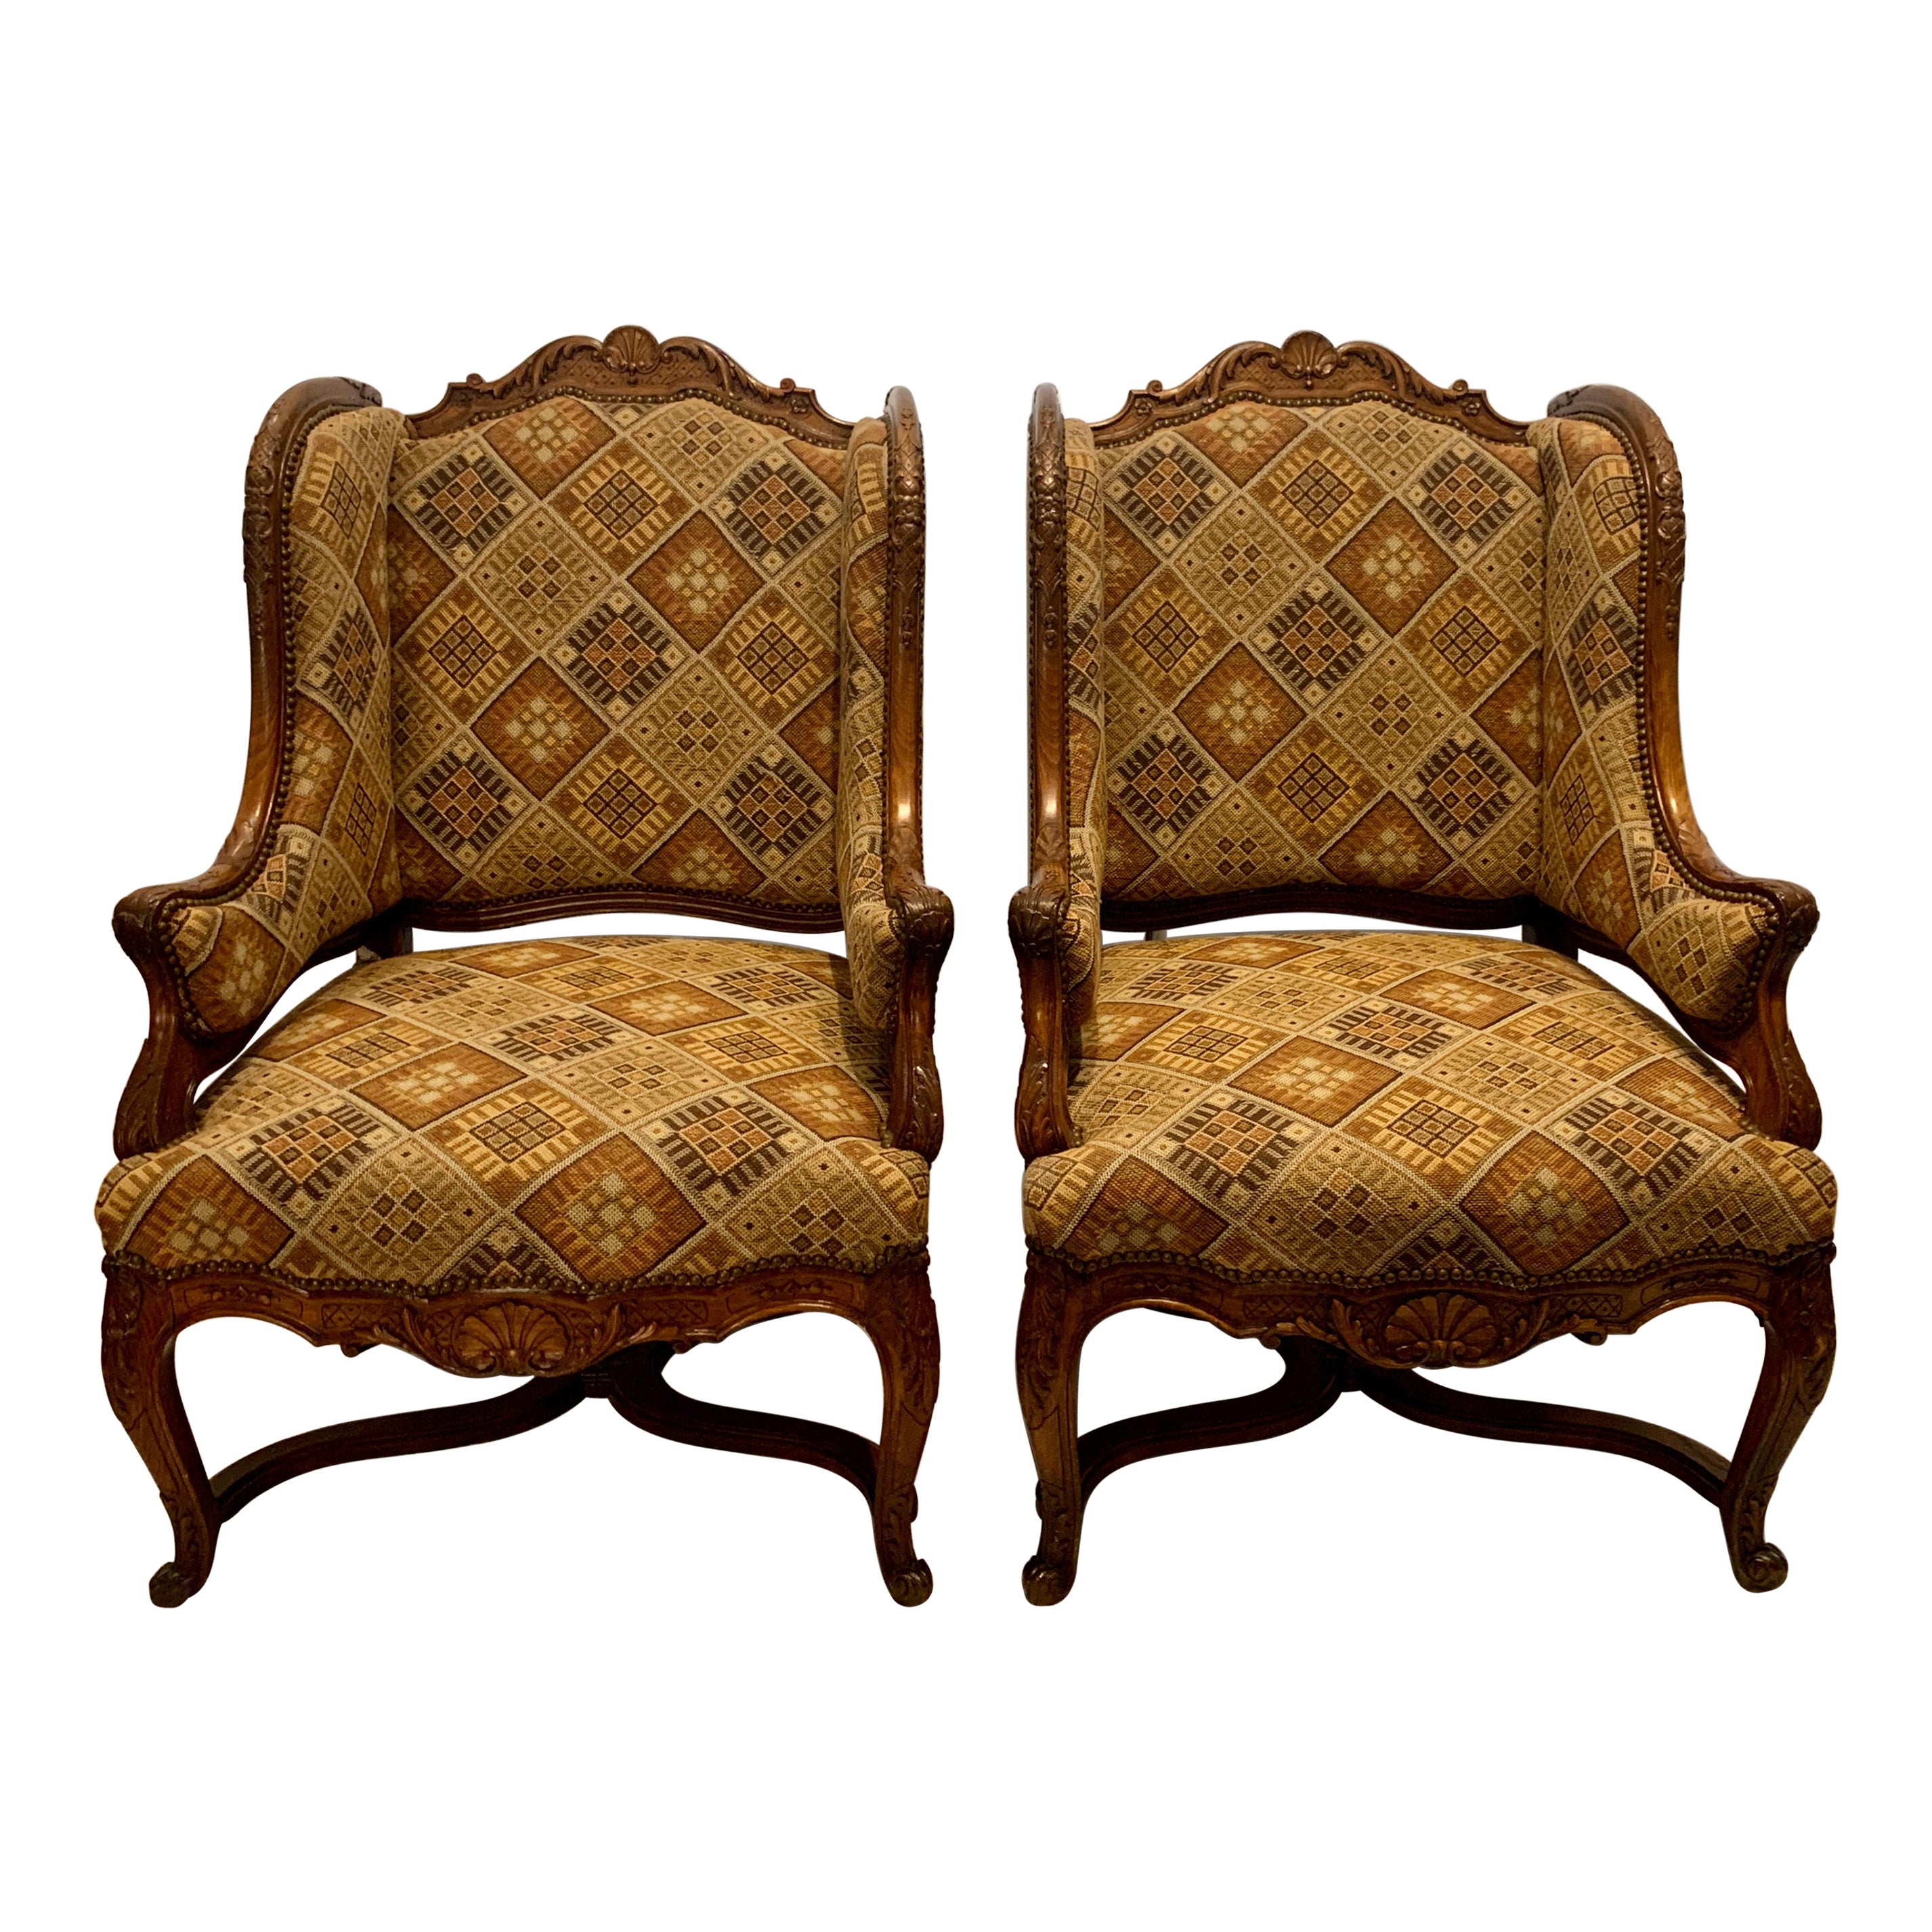 Pair Antique French Carved Walnut Upholstered Bergeres / Armchairs, circa 1880